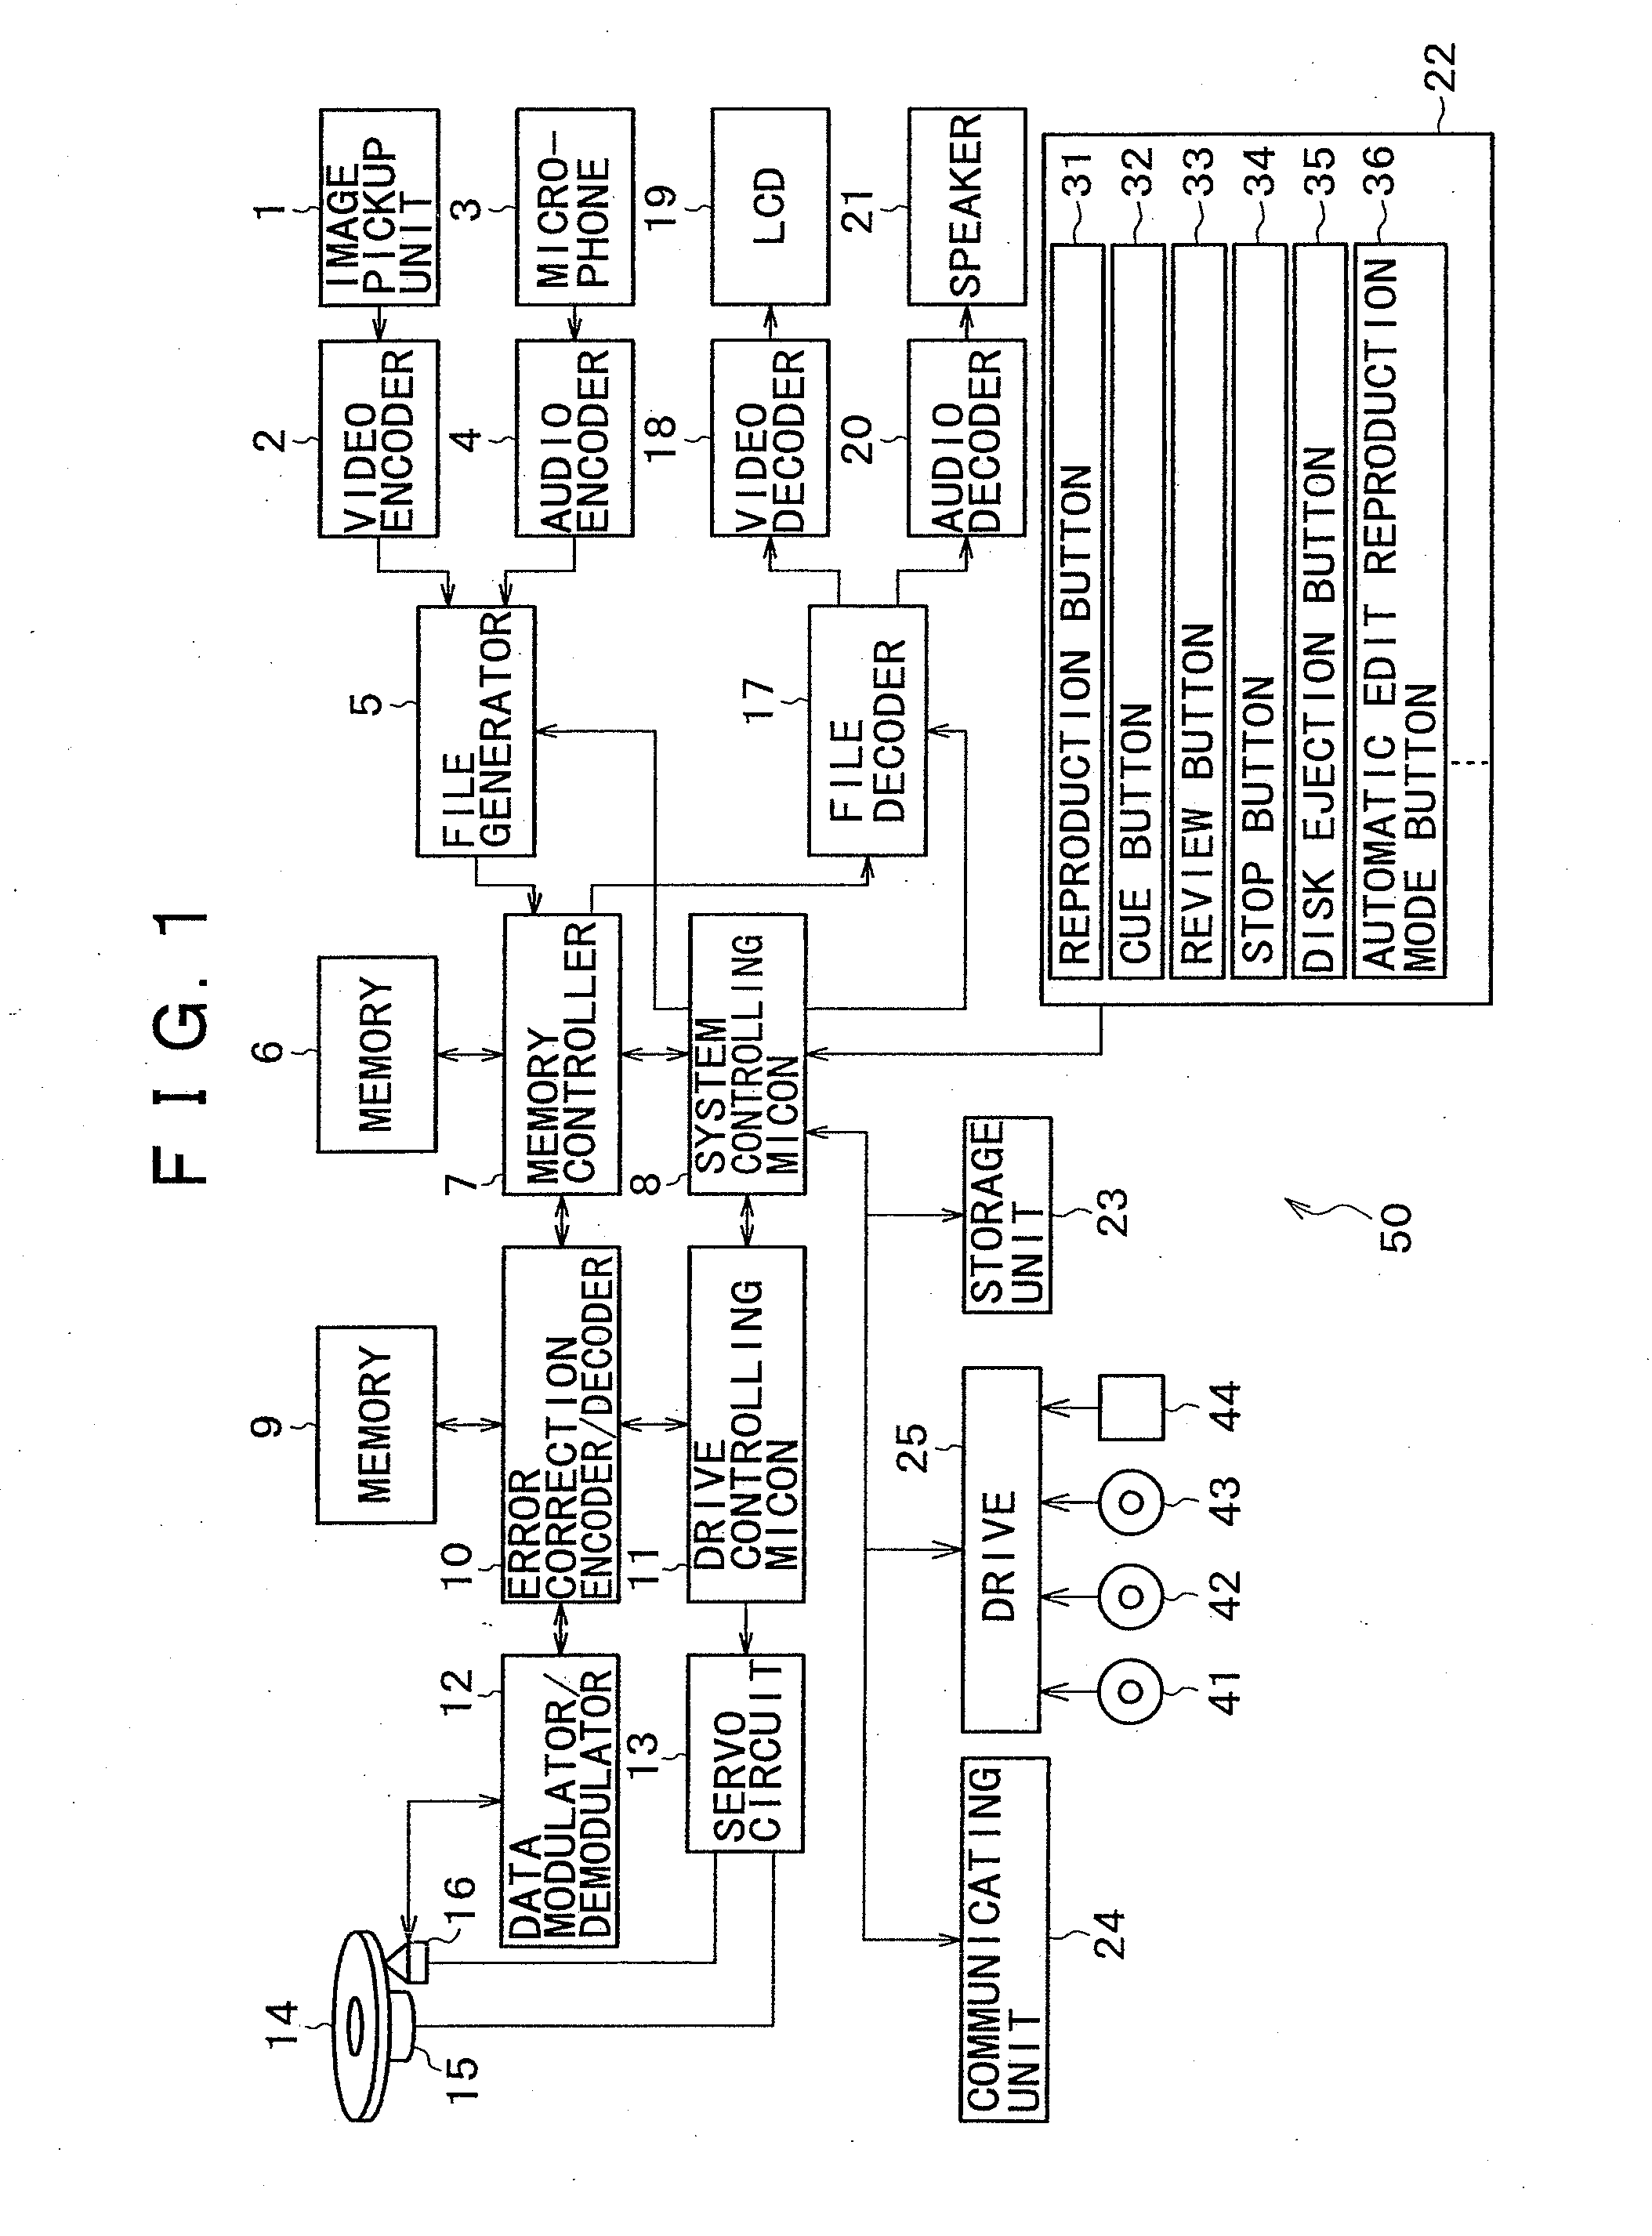 Content reproduction device and method, recording medium, and program